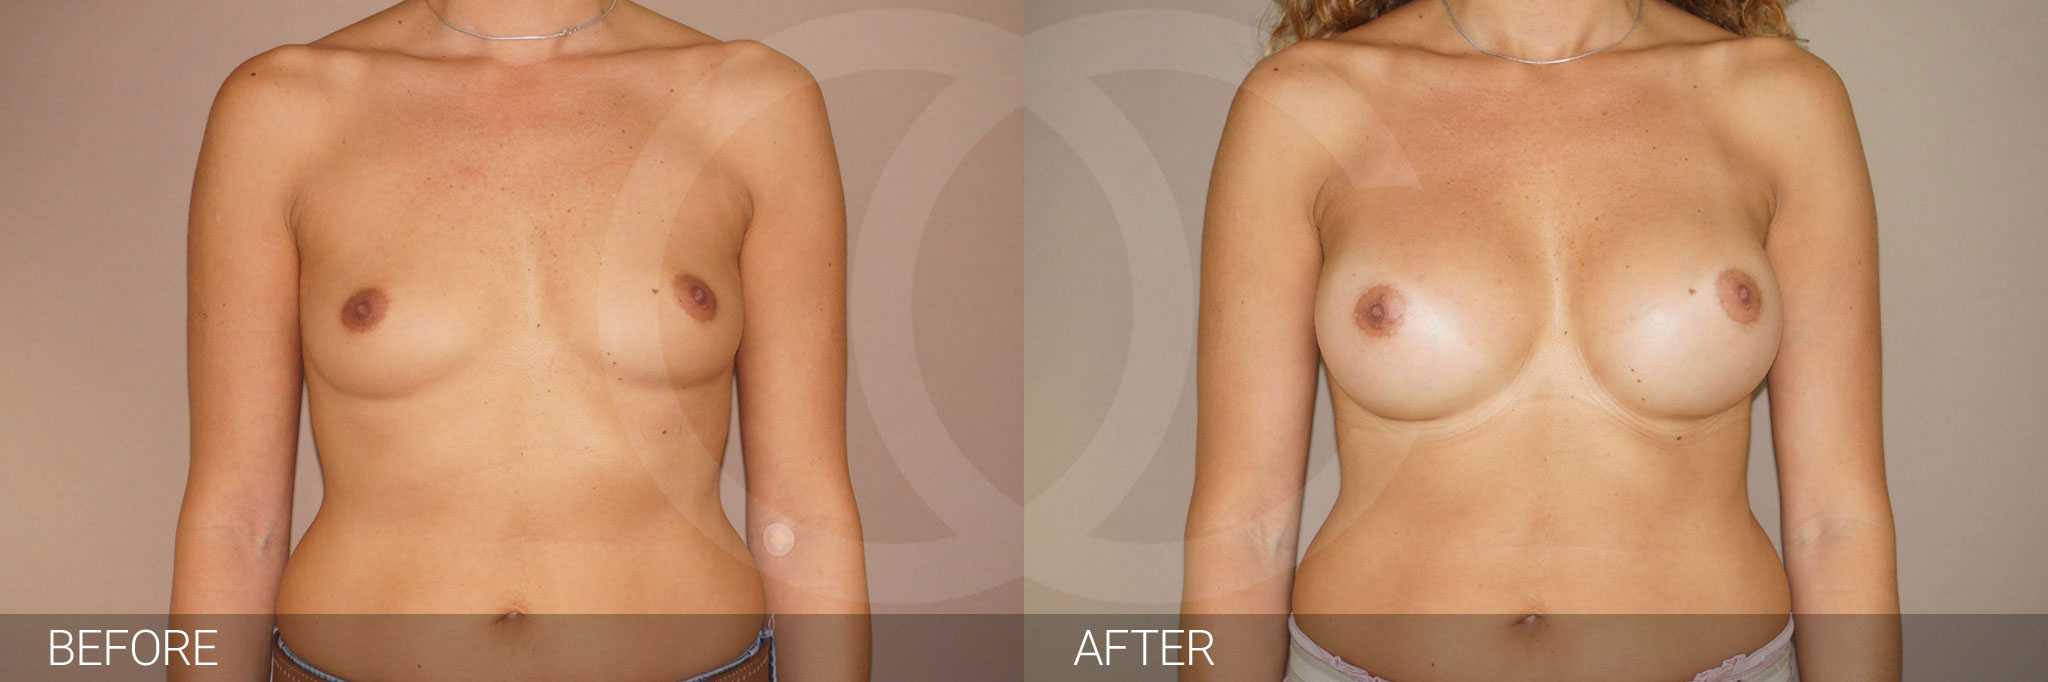 Augmentation mammaire Implants mammaires ante/post-op I